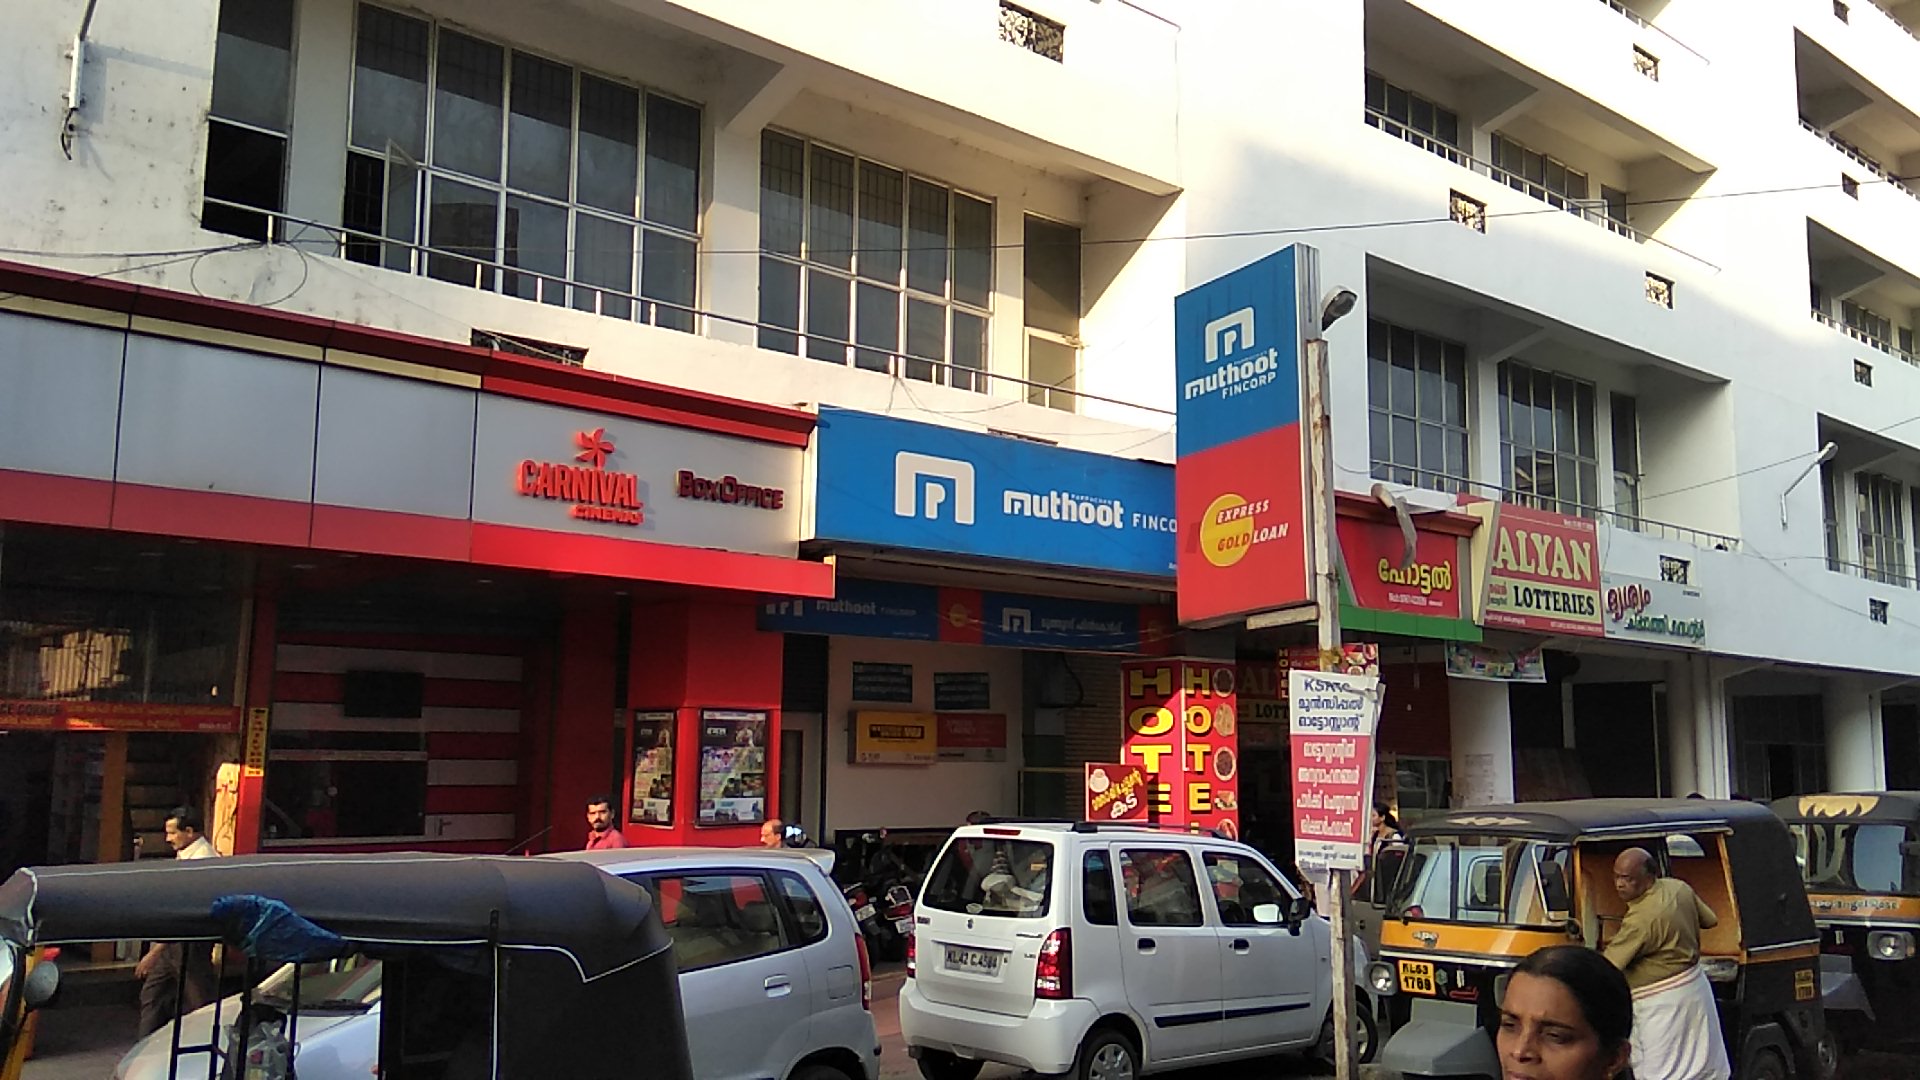 Photos and Videos of Muthoot Fincorp Gold Loan in Angamaly, Angamaly